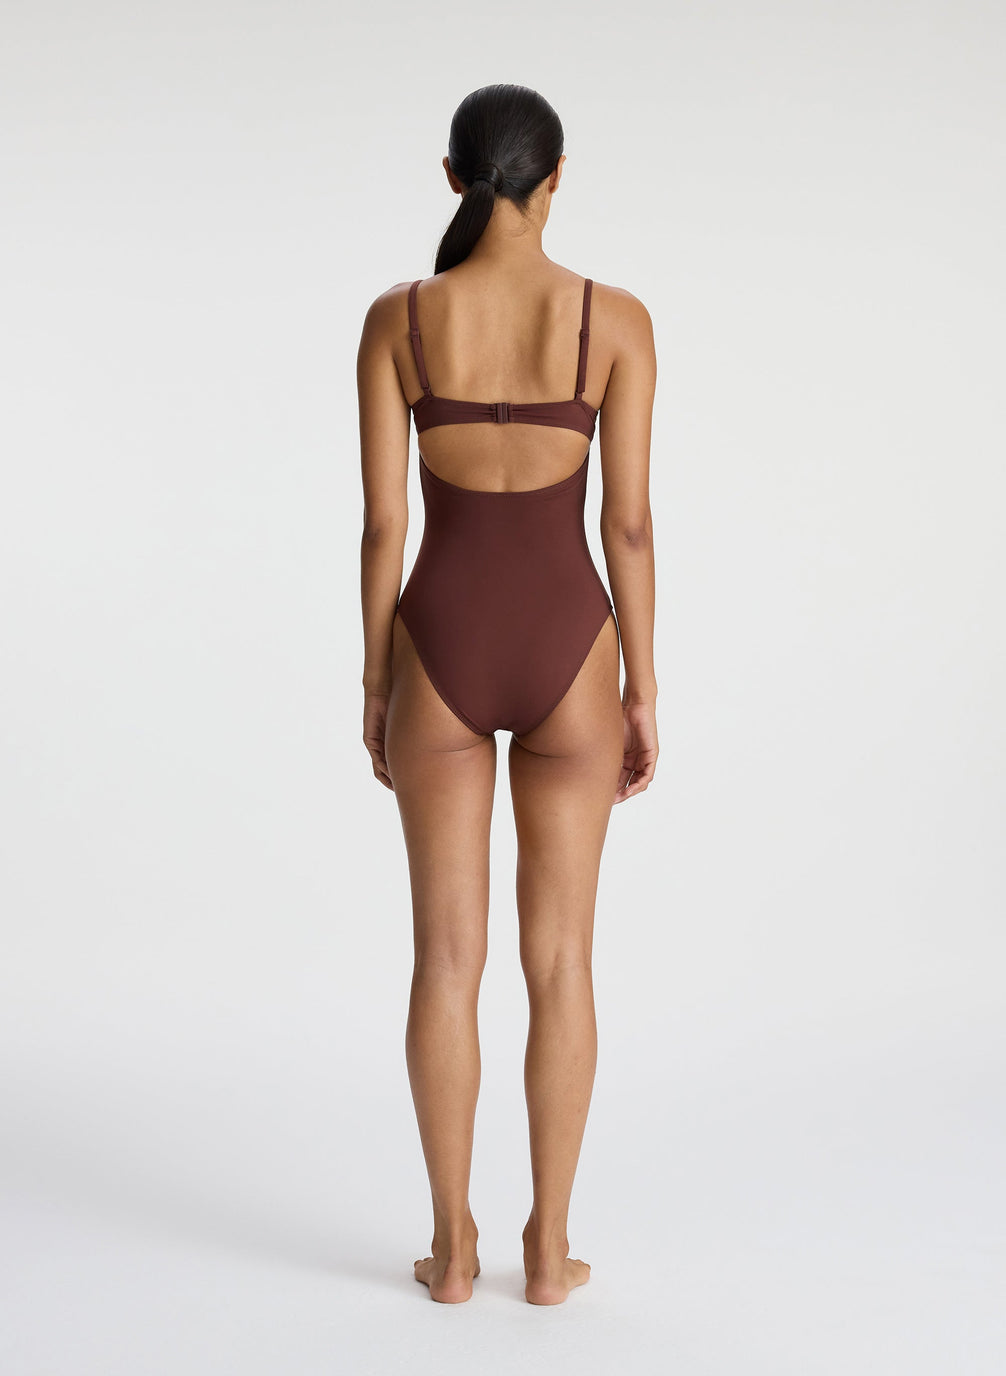 back view of woman wearing brown one piece swimsuit